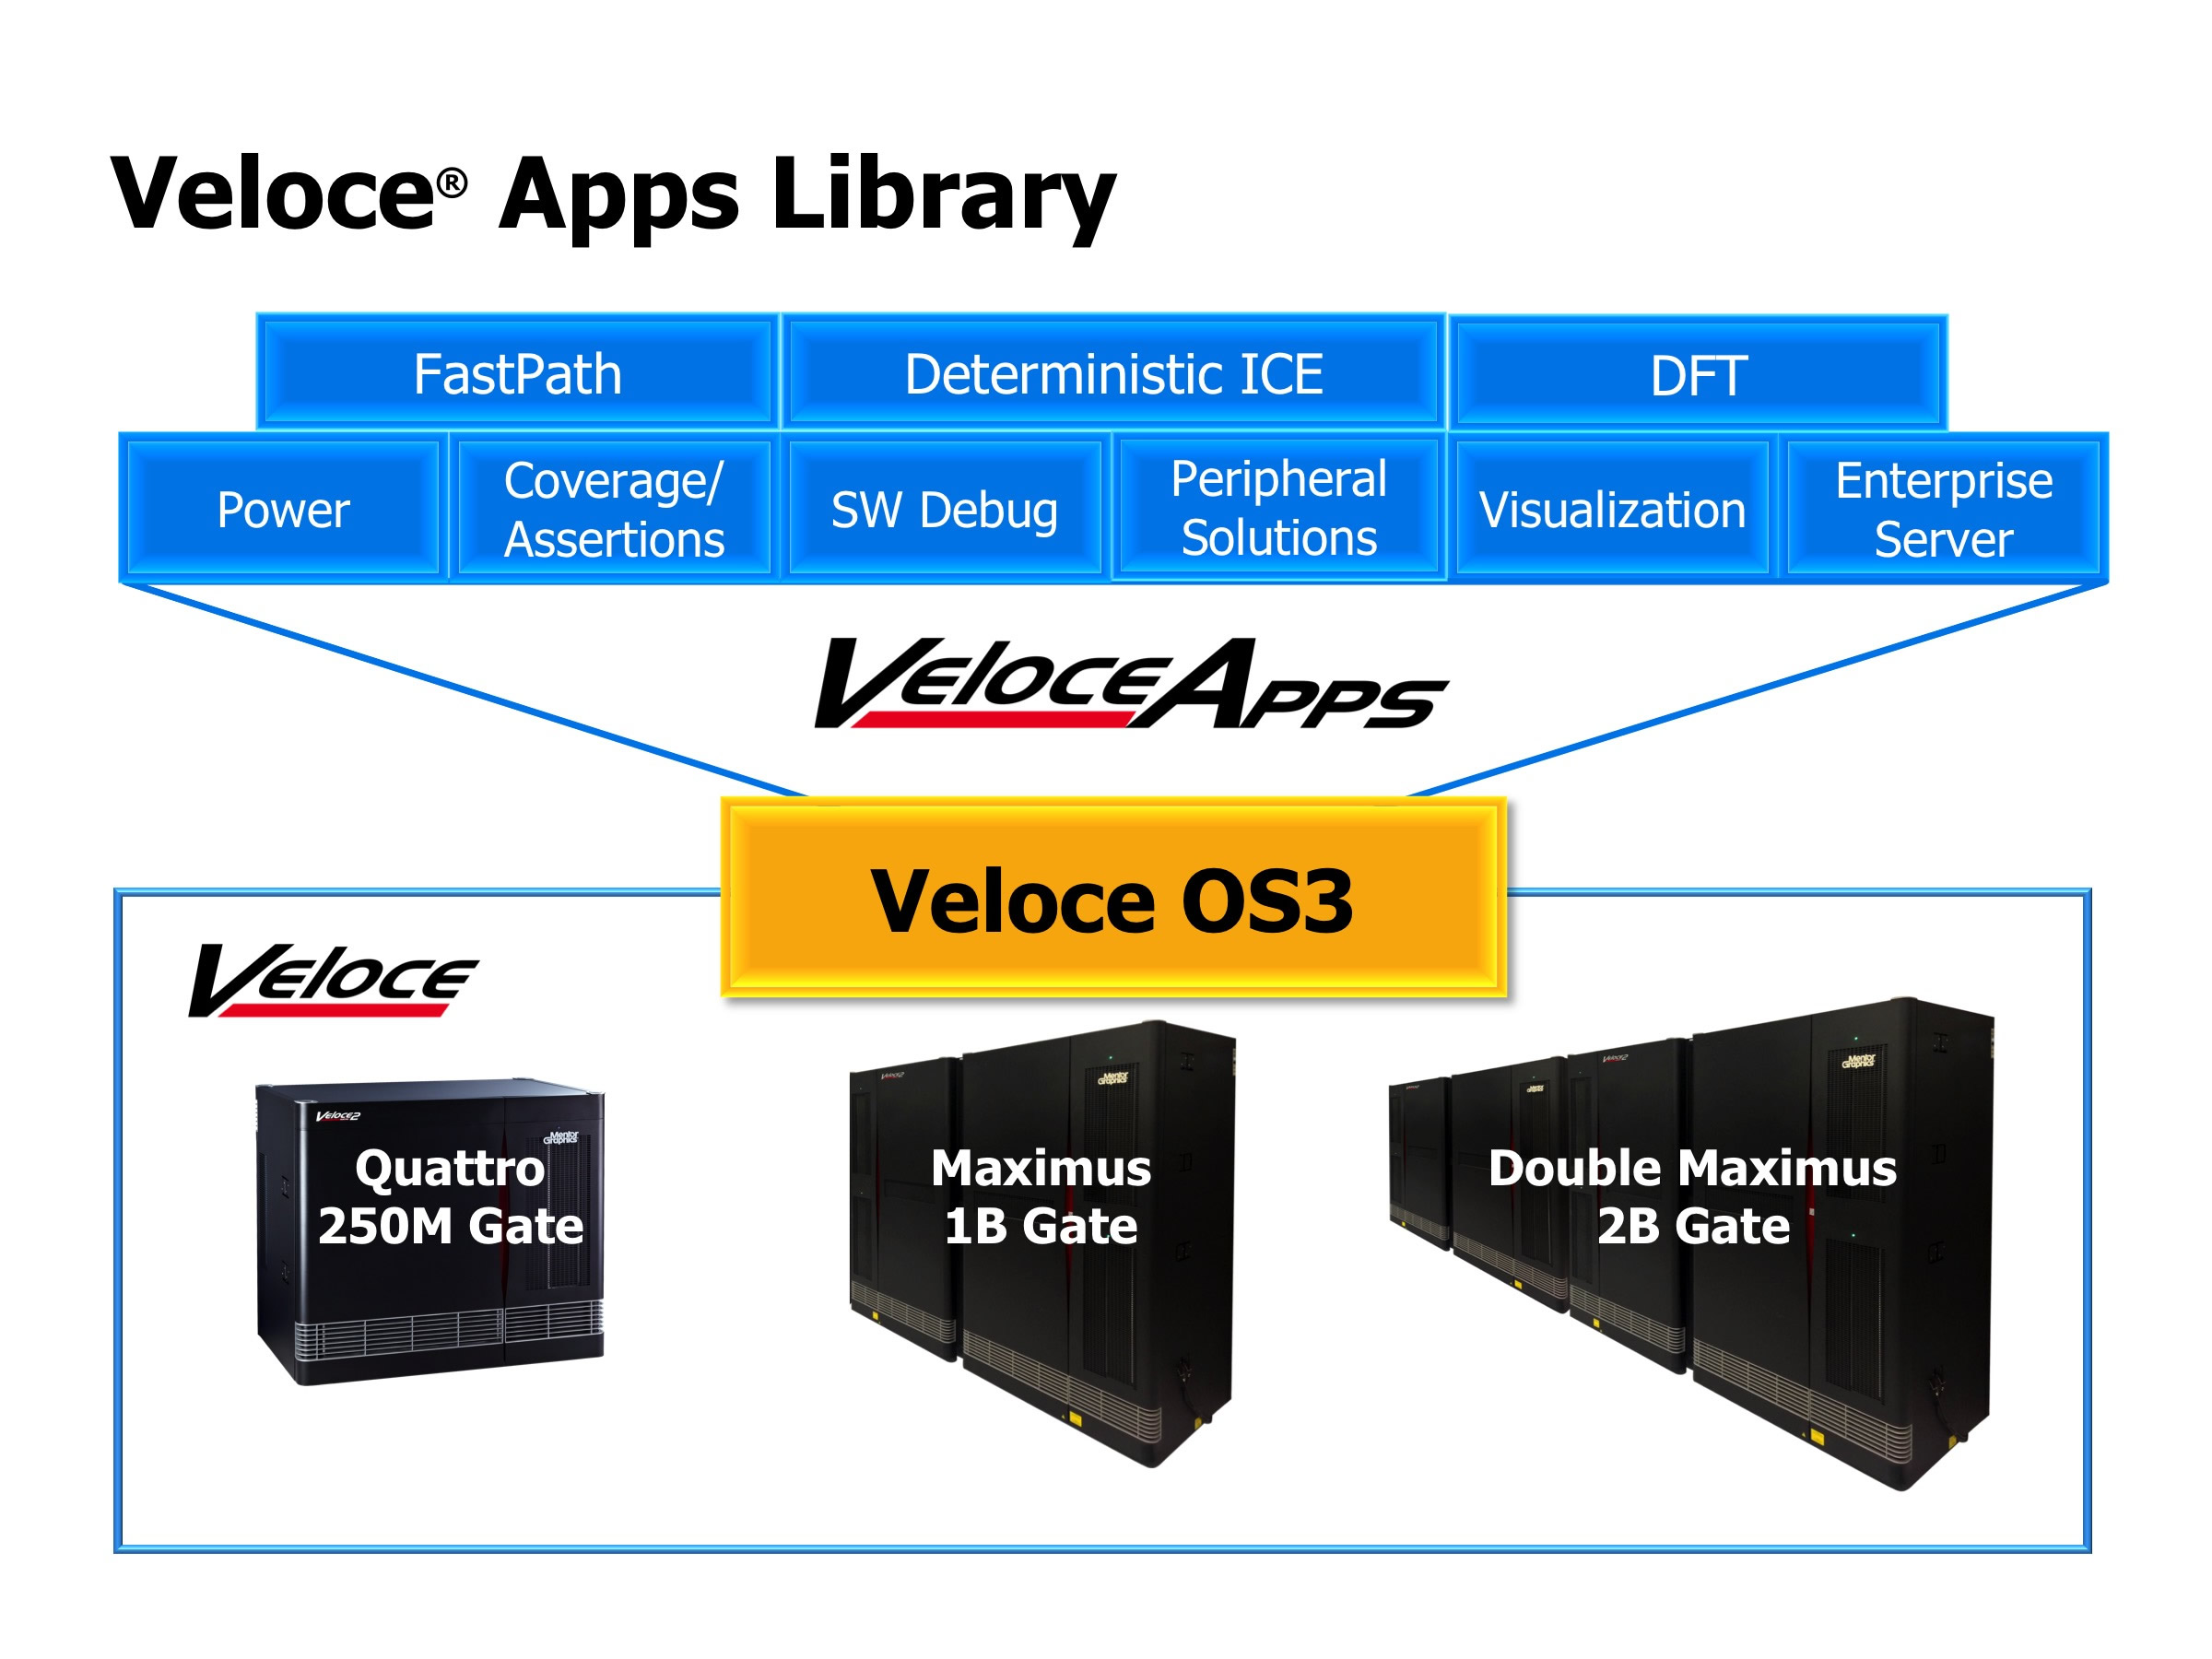 Library of Veloce Apps